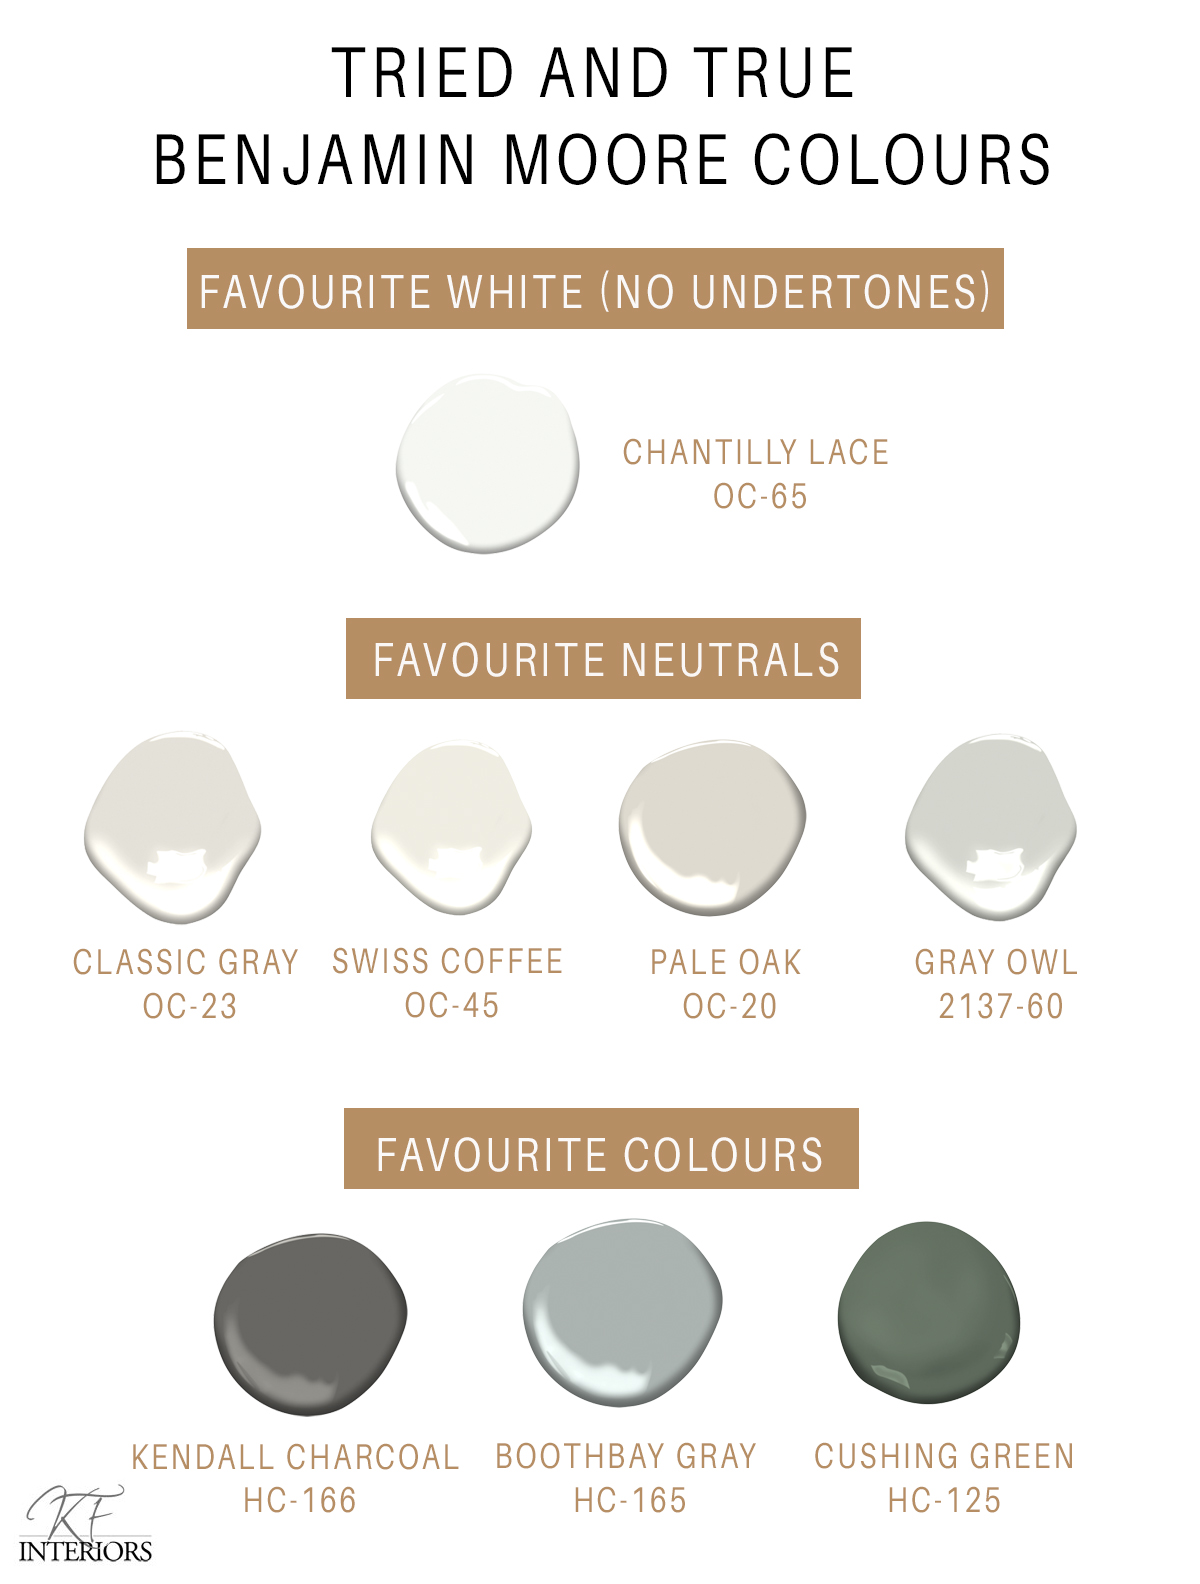 My favourite Benjamin Moore paint colours